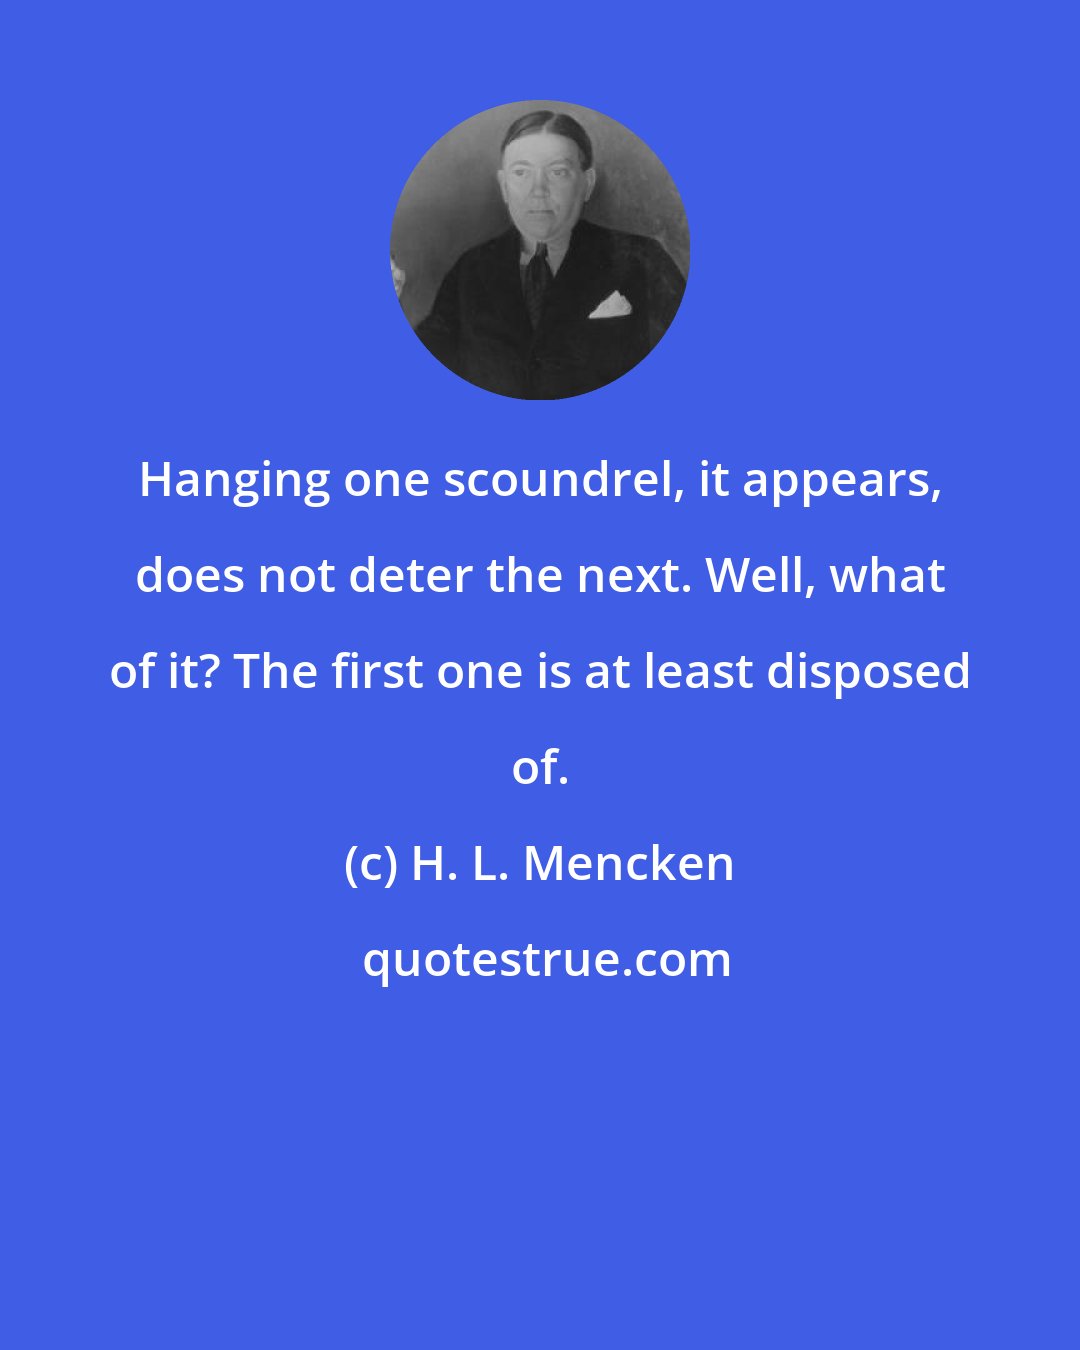 H. L. Mencken: Hanging one scoundrel, it appears, does not deter the next. Well, what of it? The first one is at least disposed of.